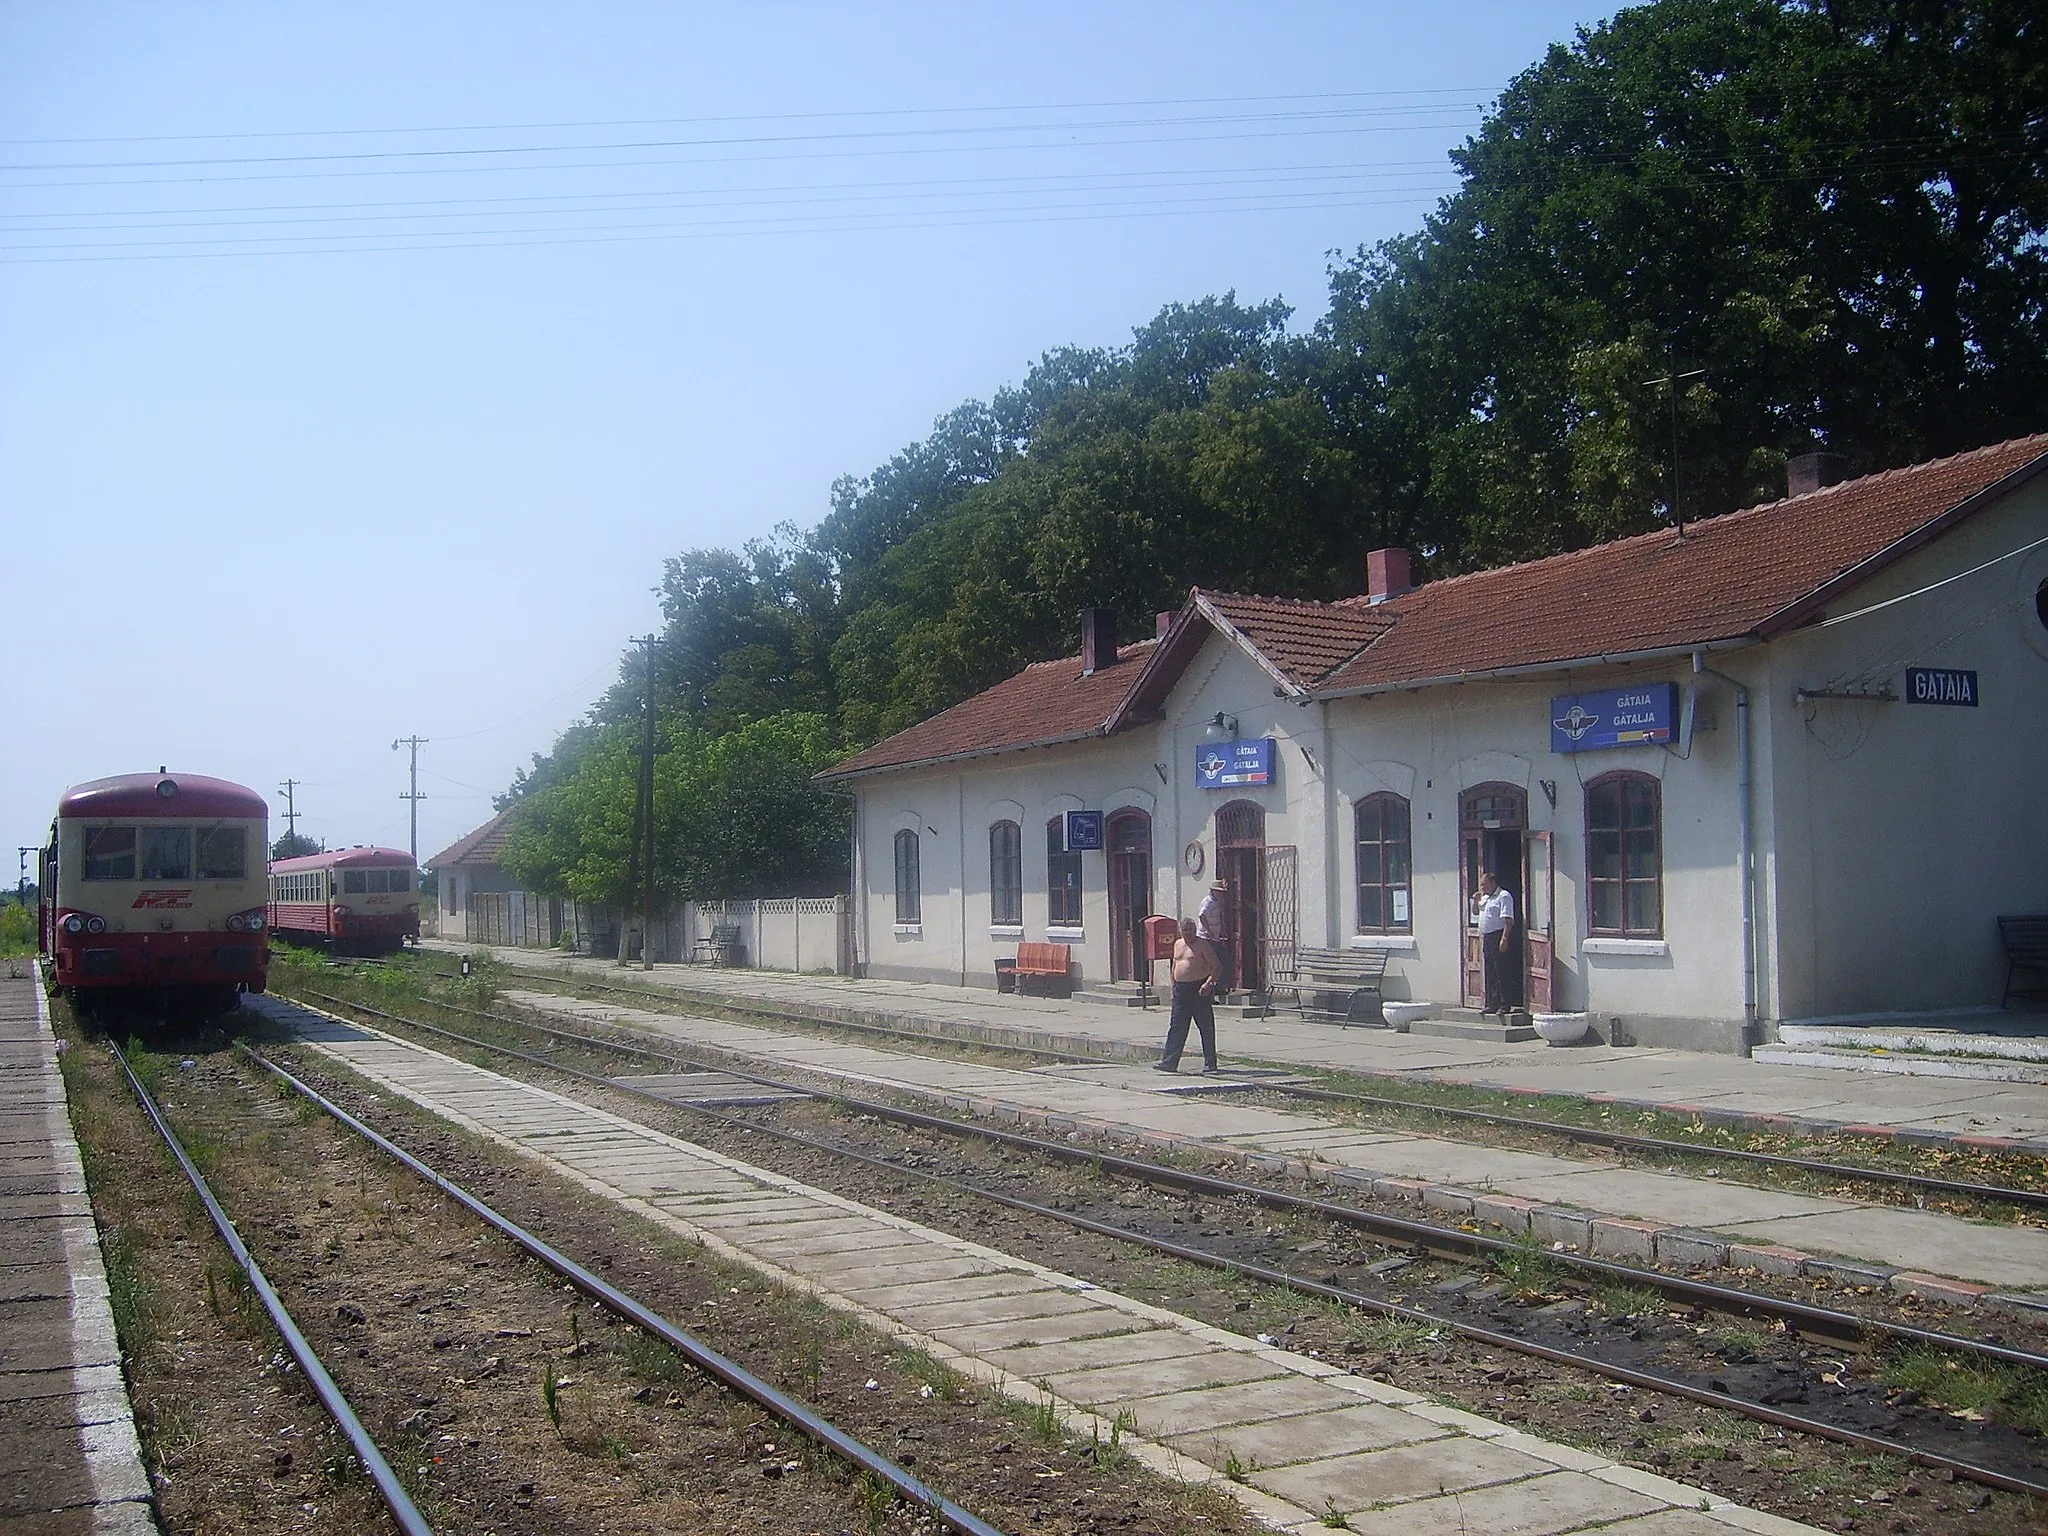 Photo showing: Train station in Gătaia, Romania is a hub for passenger trains of Regiotrans.